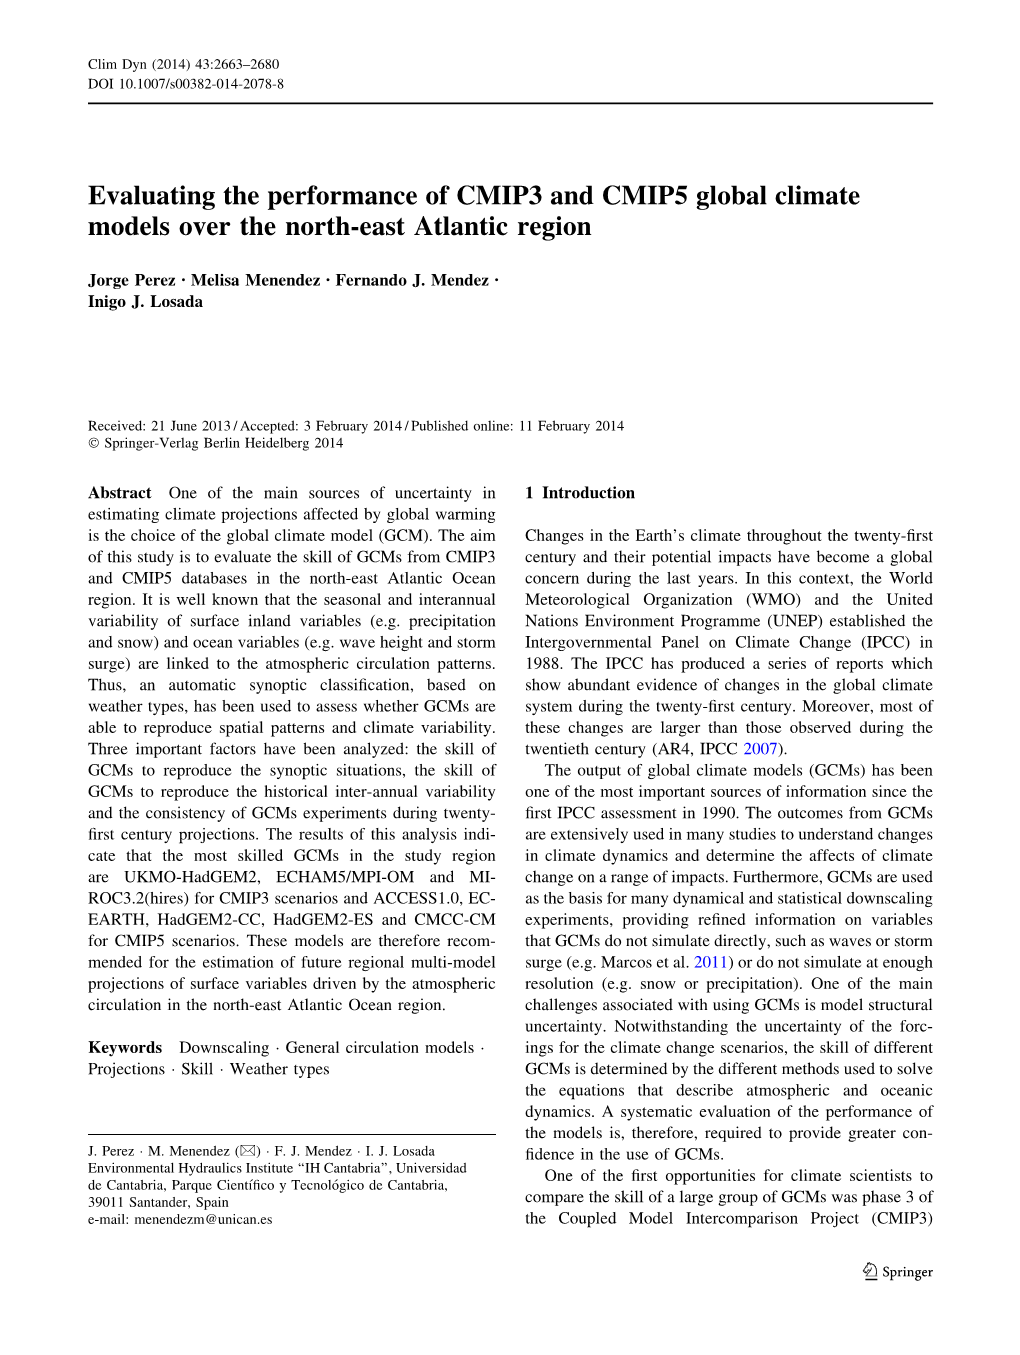 Evaluating the Performance of CMIP3 and CMIP5 Global Climate Models Over the North-East Atlantic Region